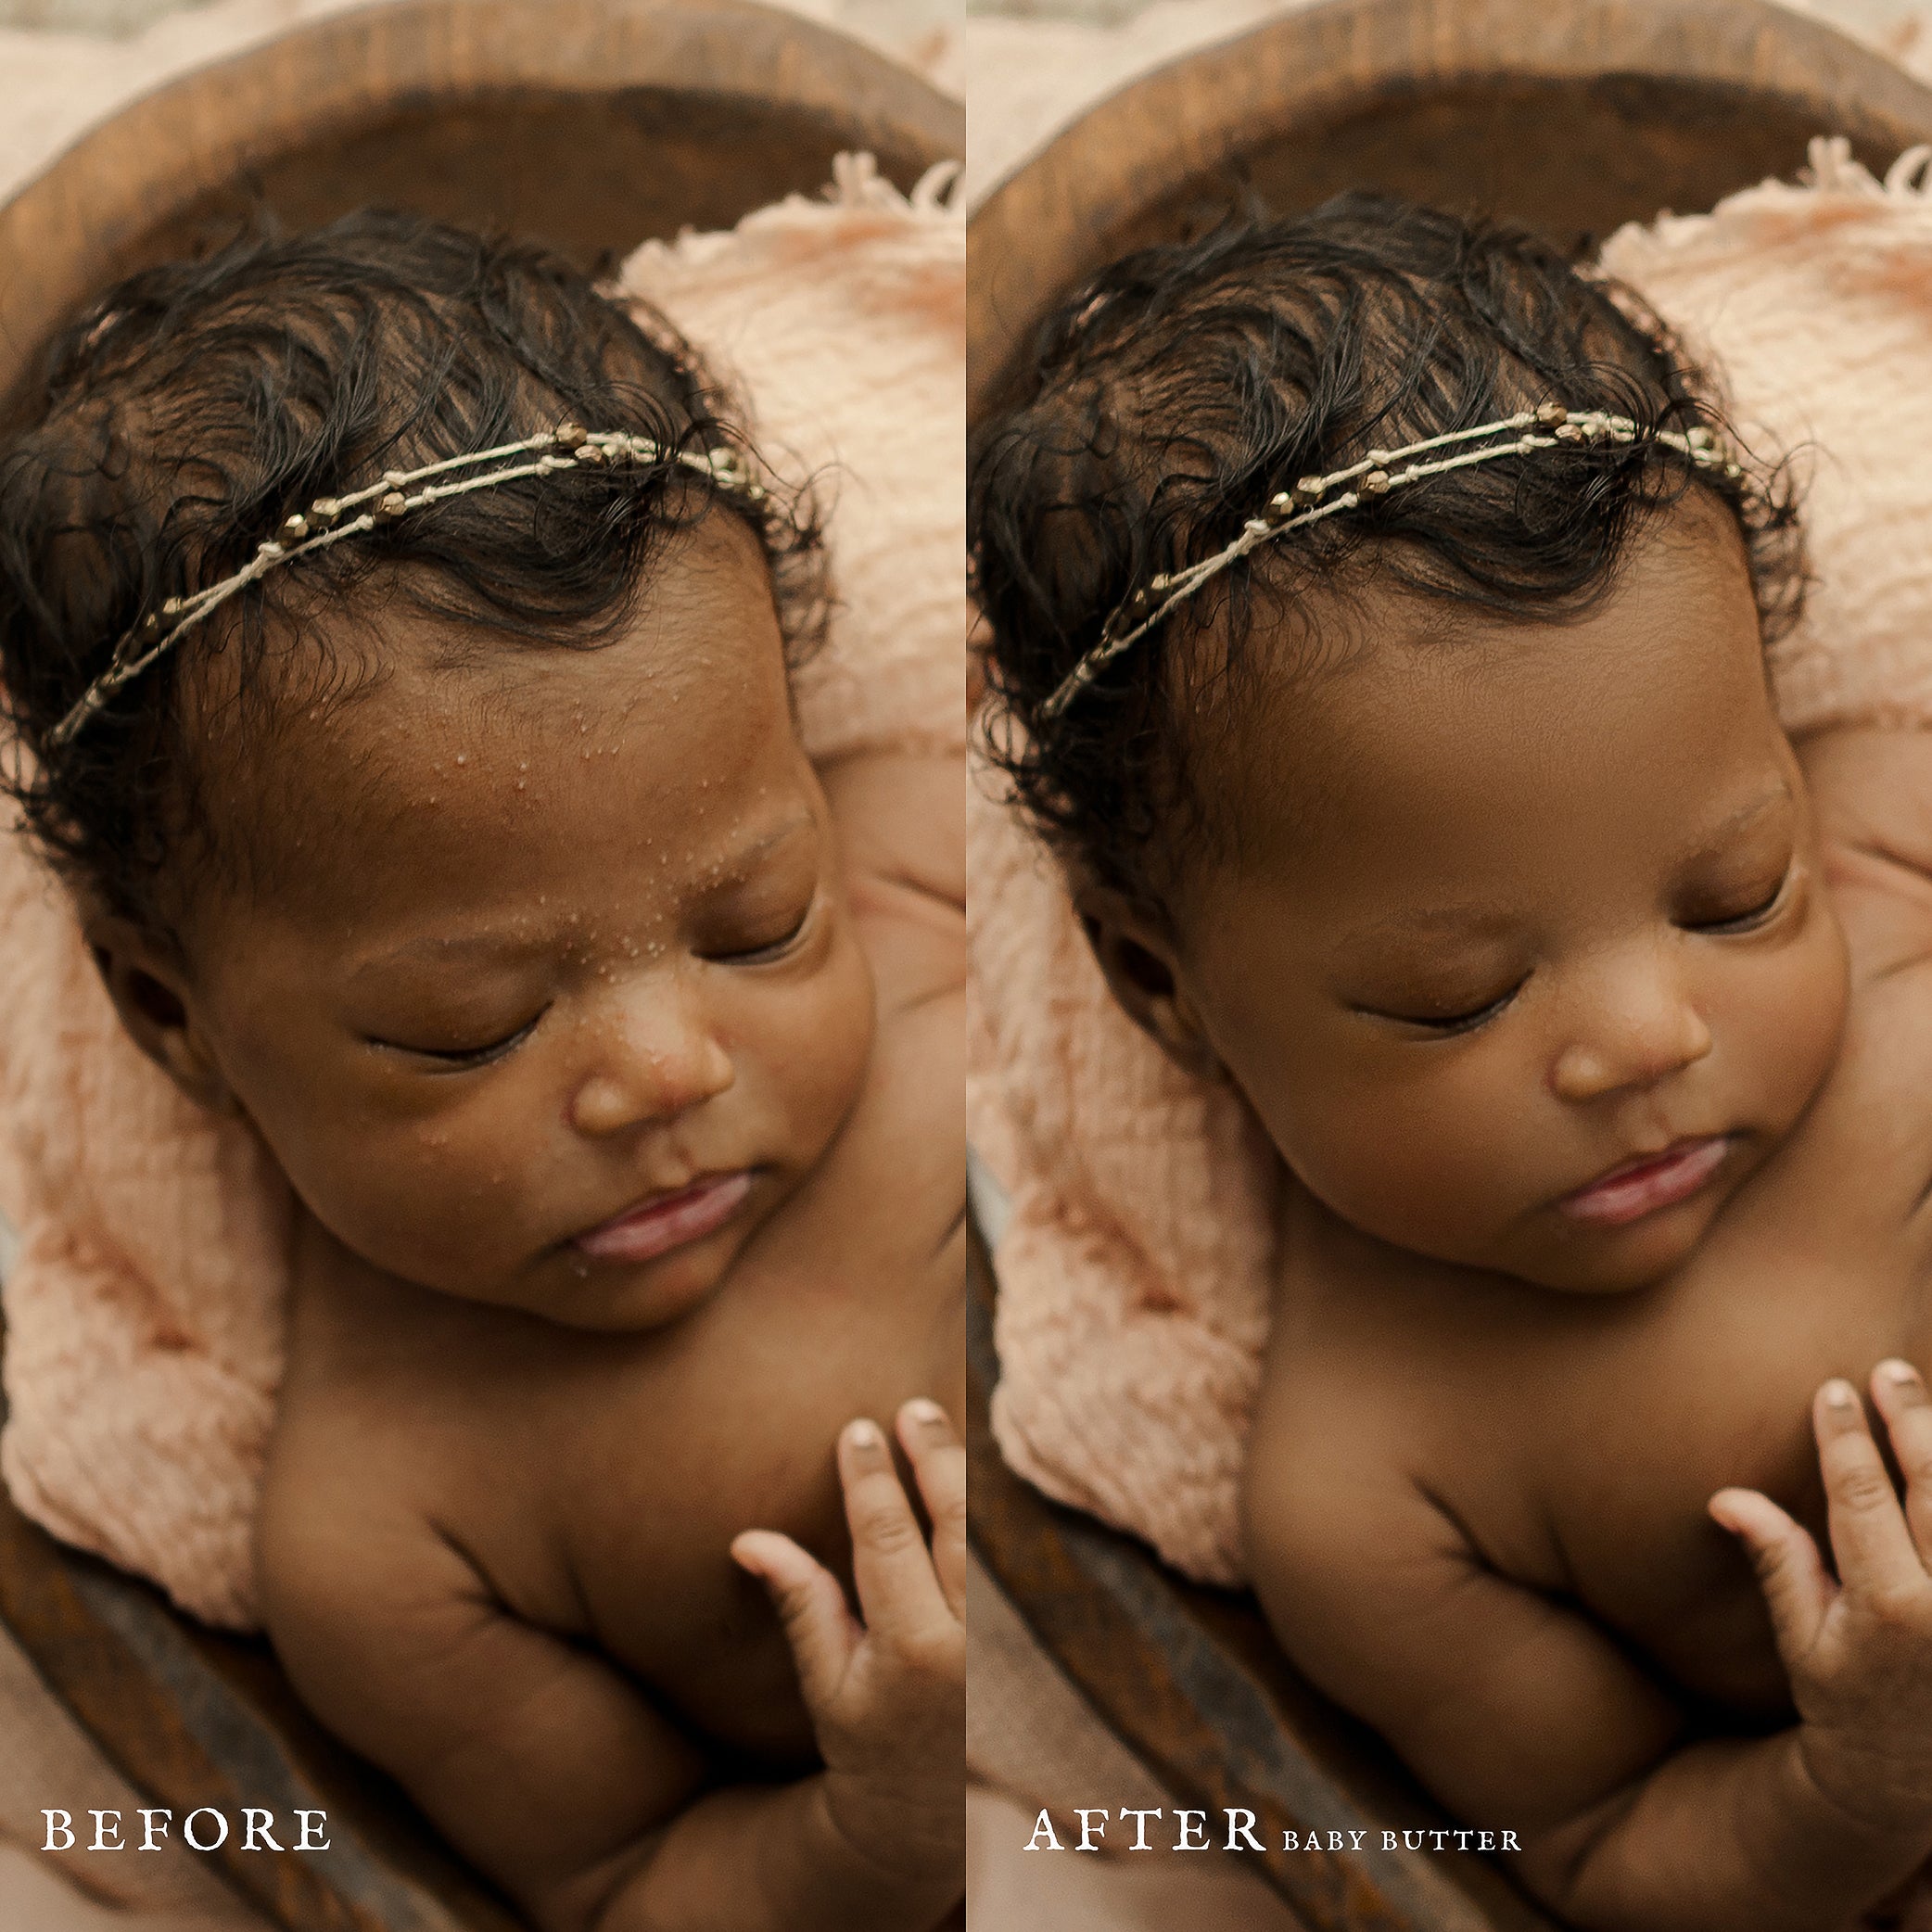 Newborn Photography Skin Retouching Photoshop Actions Best Lightroom Presets for Newborn Photography Newborn Maternity Portrait Photoshop Actions Skin Retouching Photoshop Actions by Jessica G. Photography